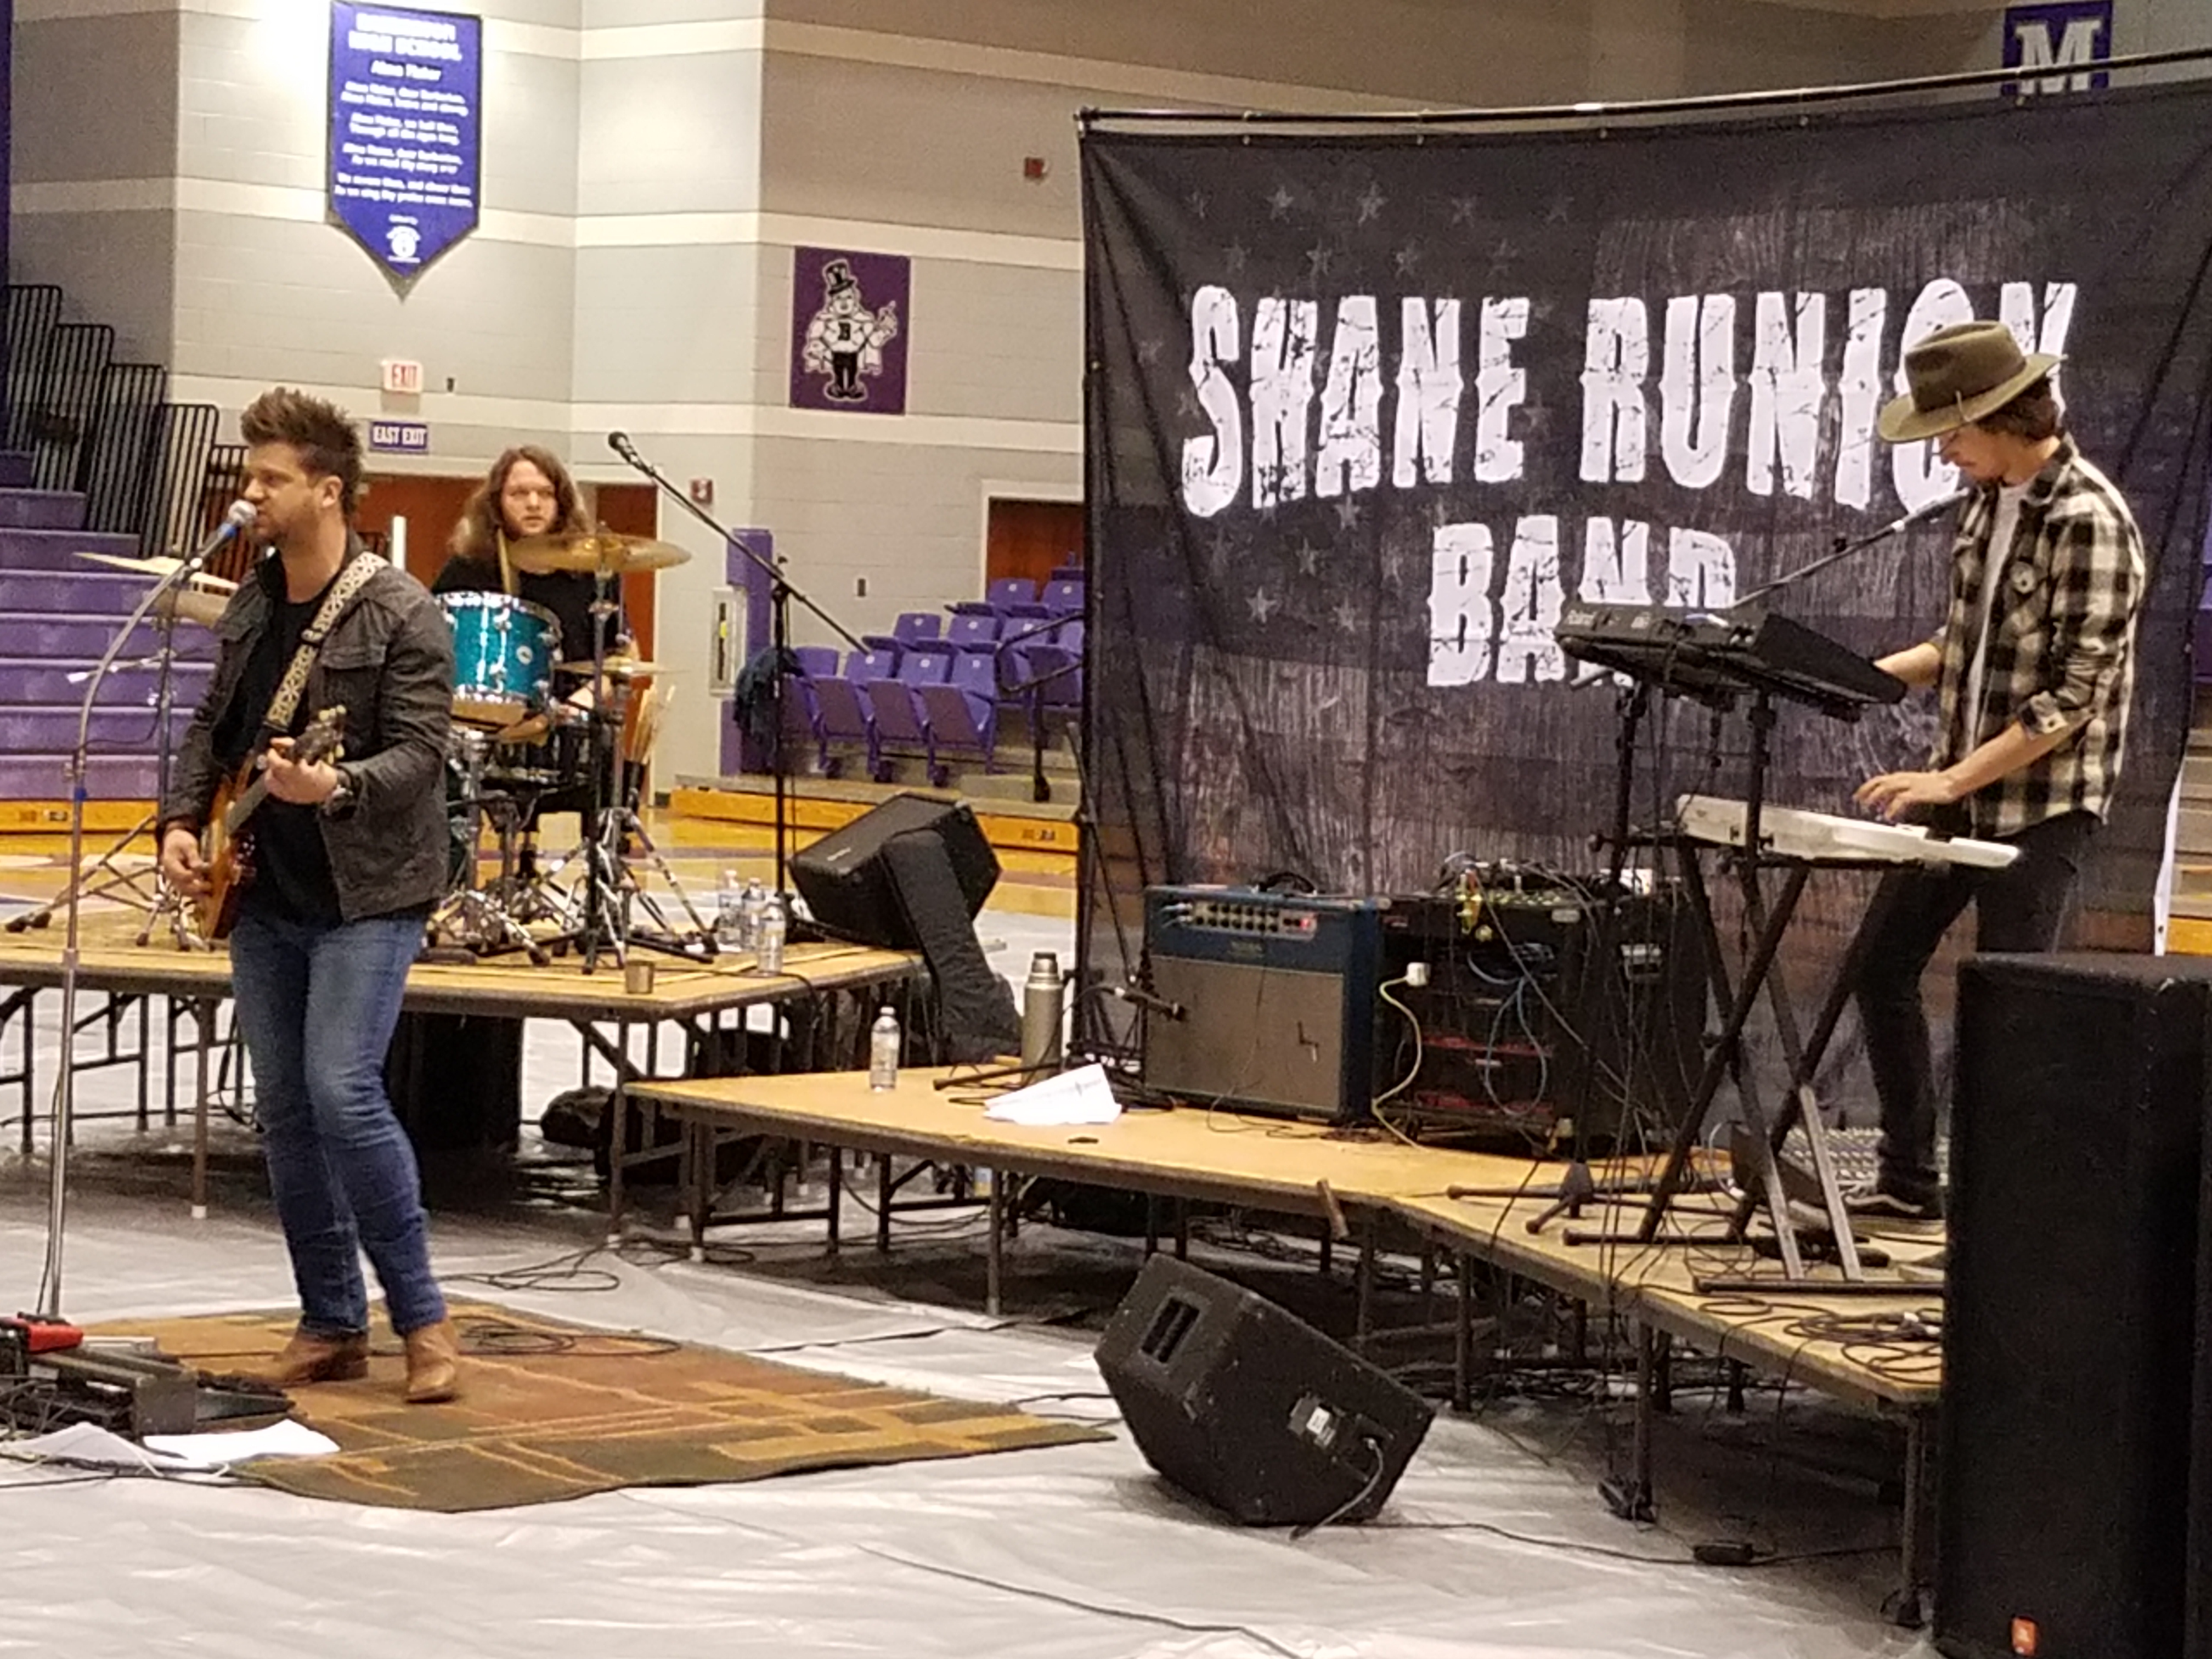 Shane Runion Band performs for Drug-Free Clubs of America